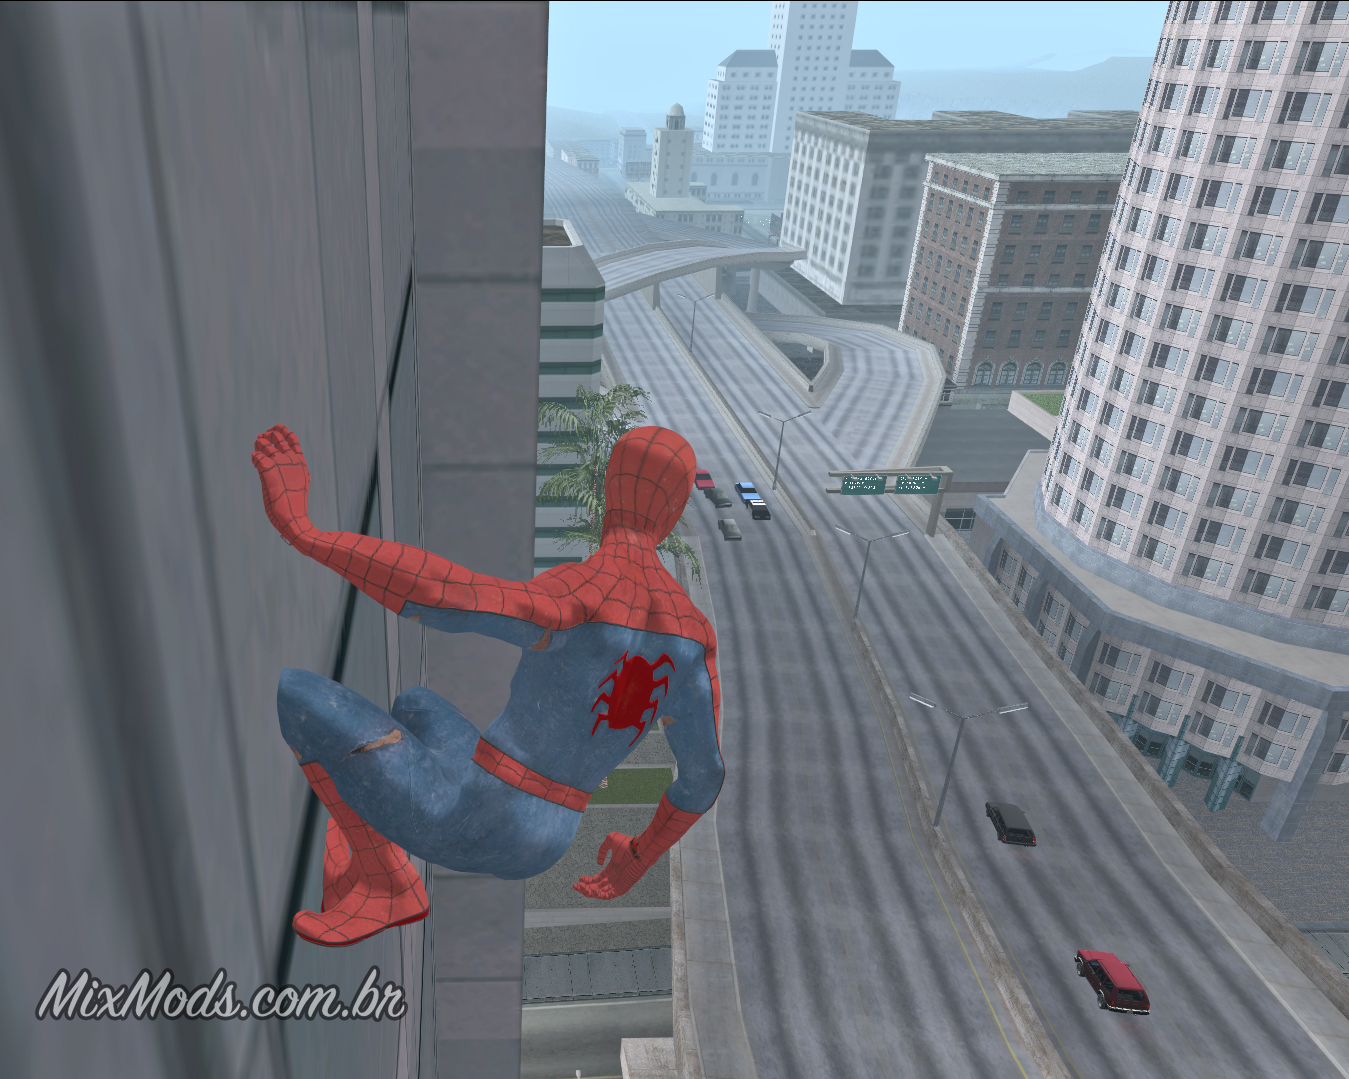 New mod for GTA V lets you play as Spider-Man